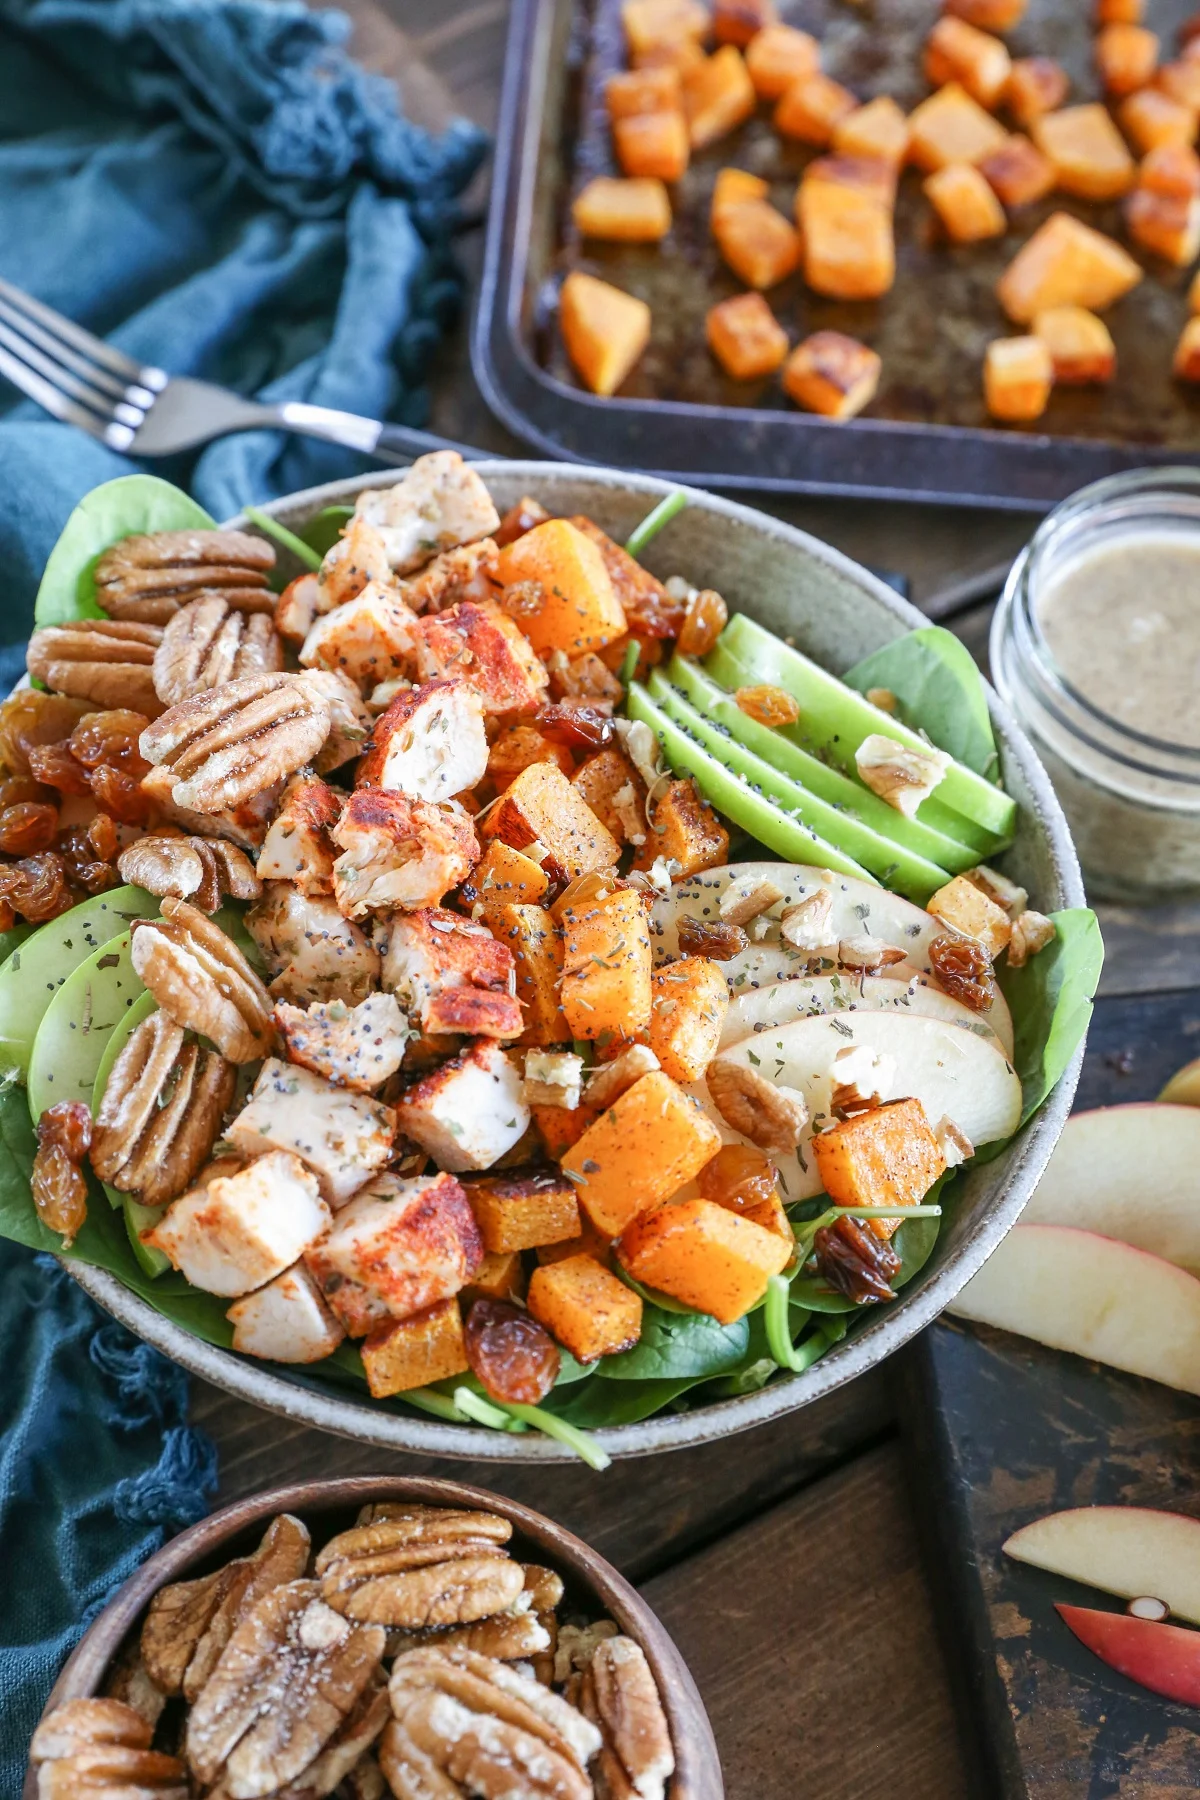 Roasted Butternut Squash Spinach Salad with apples, pecans,golden raisins, and cinnamon maple cider vinaigrette. A healthy whole30 paleo meal!